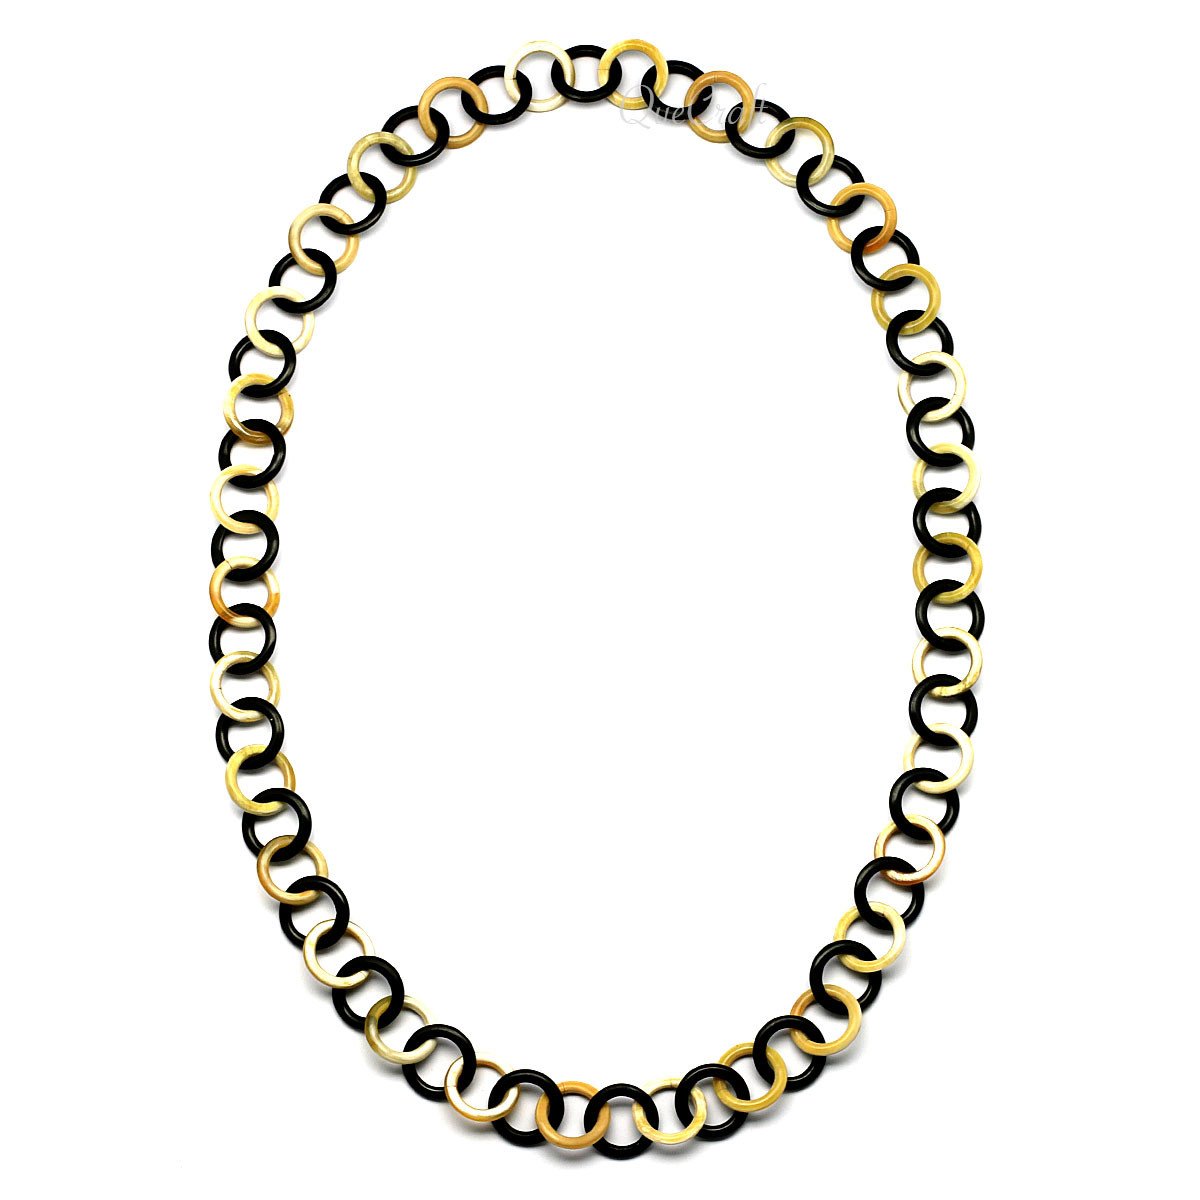 Horn Chain Necklace #4019 - HORN JEWELRY